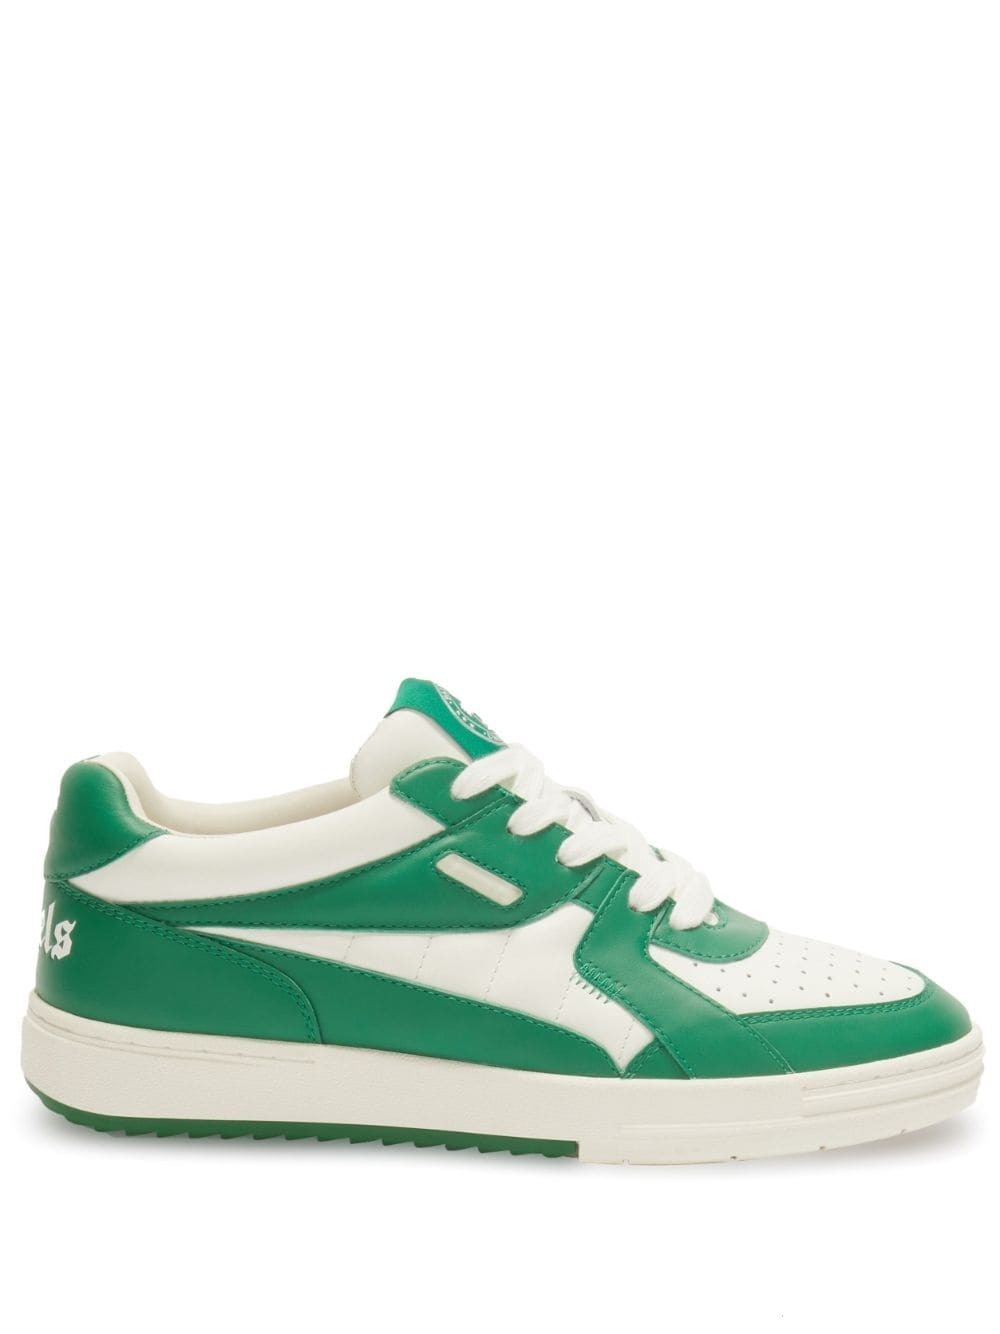 PALM ANGELS - Palm University Sneakers Palm Angels